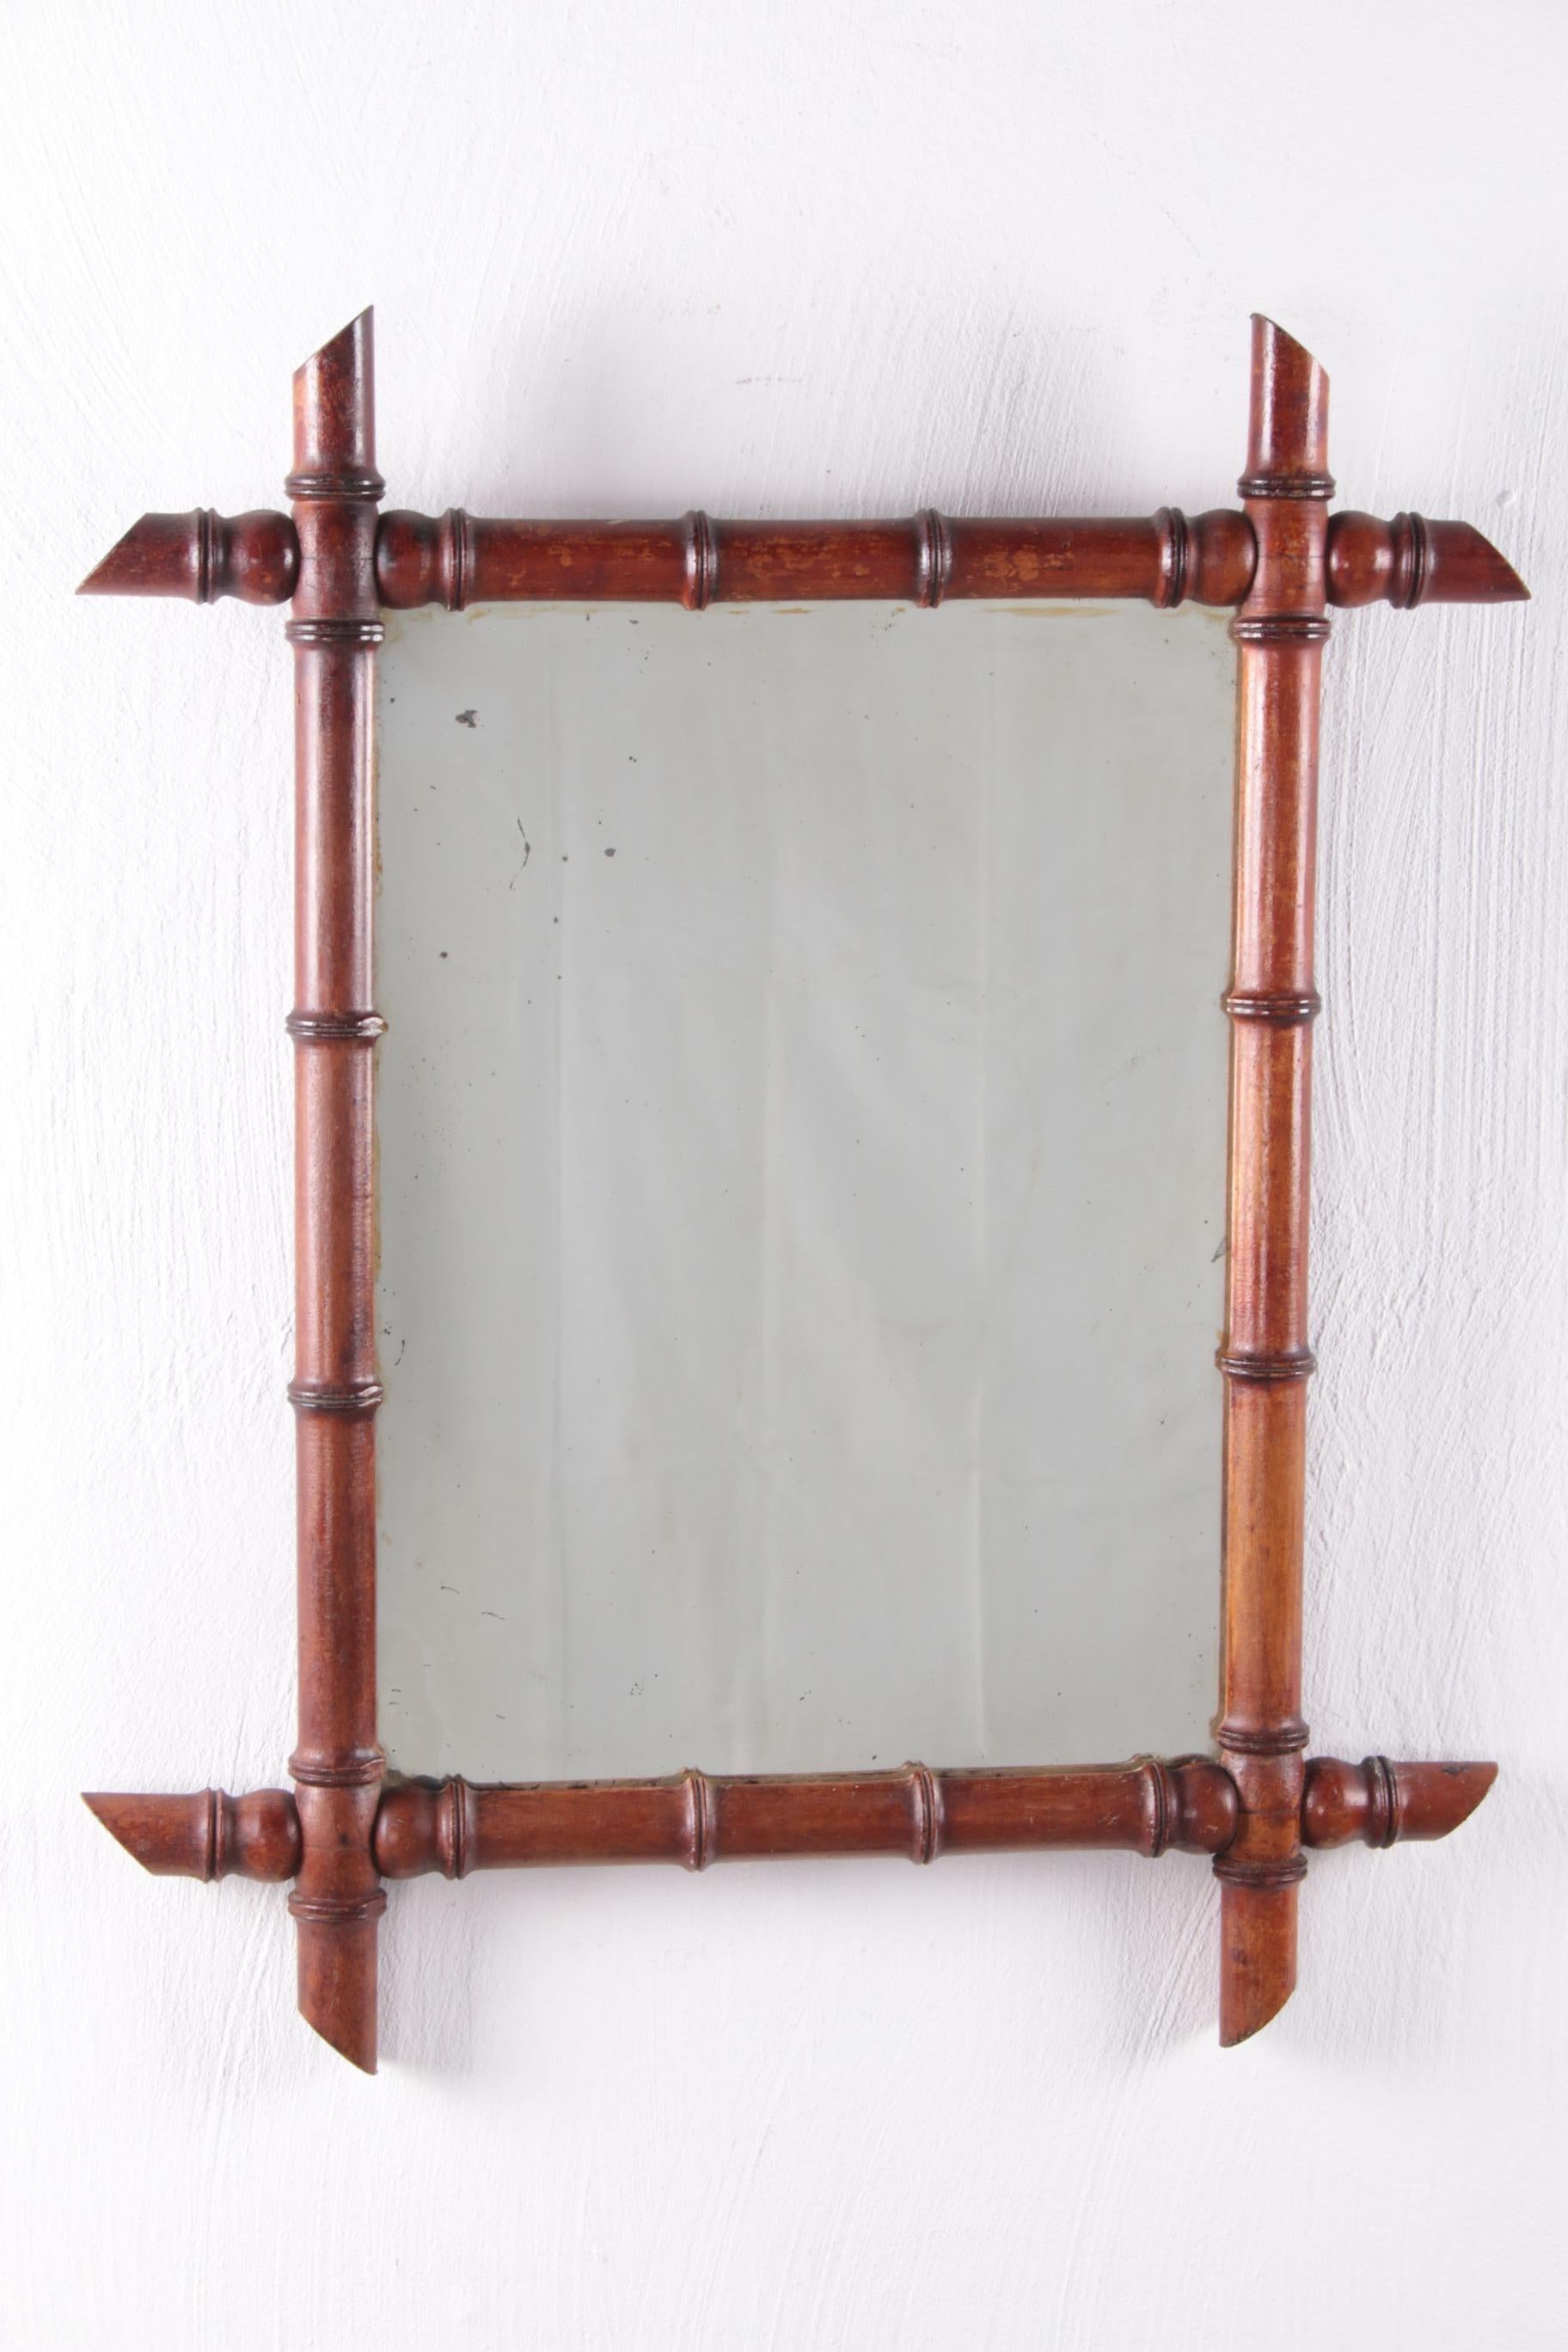 Vintage large French bamboo mirror


Authentic French bamboo mirror from France

With a bit of luck you can still find these mirrors in France and were made around 1920.

The appearance and patina are beautiful.
- Estimates circa 1920
- Wooden